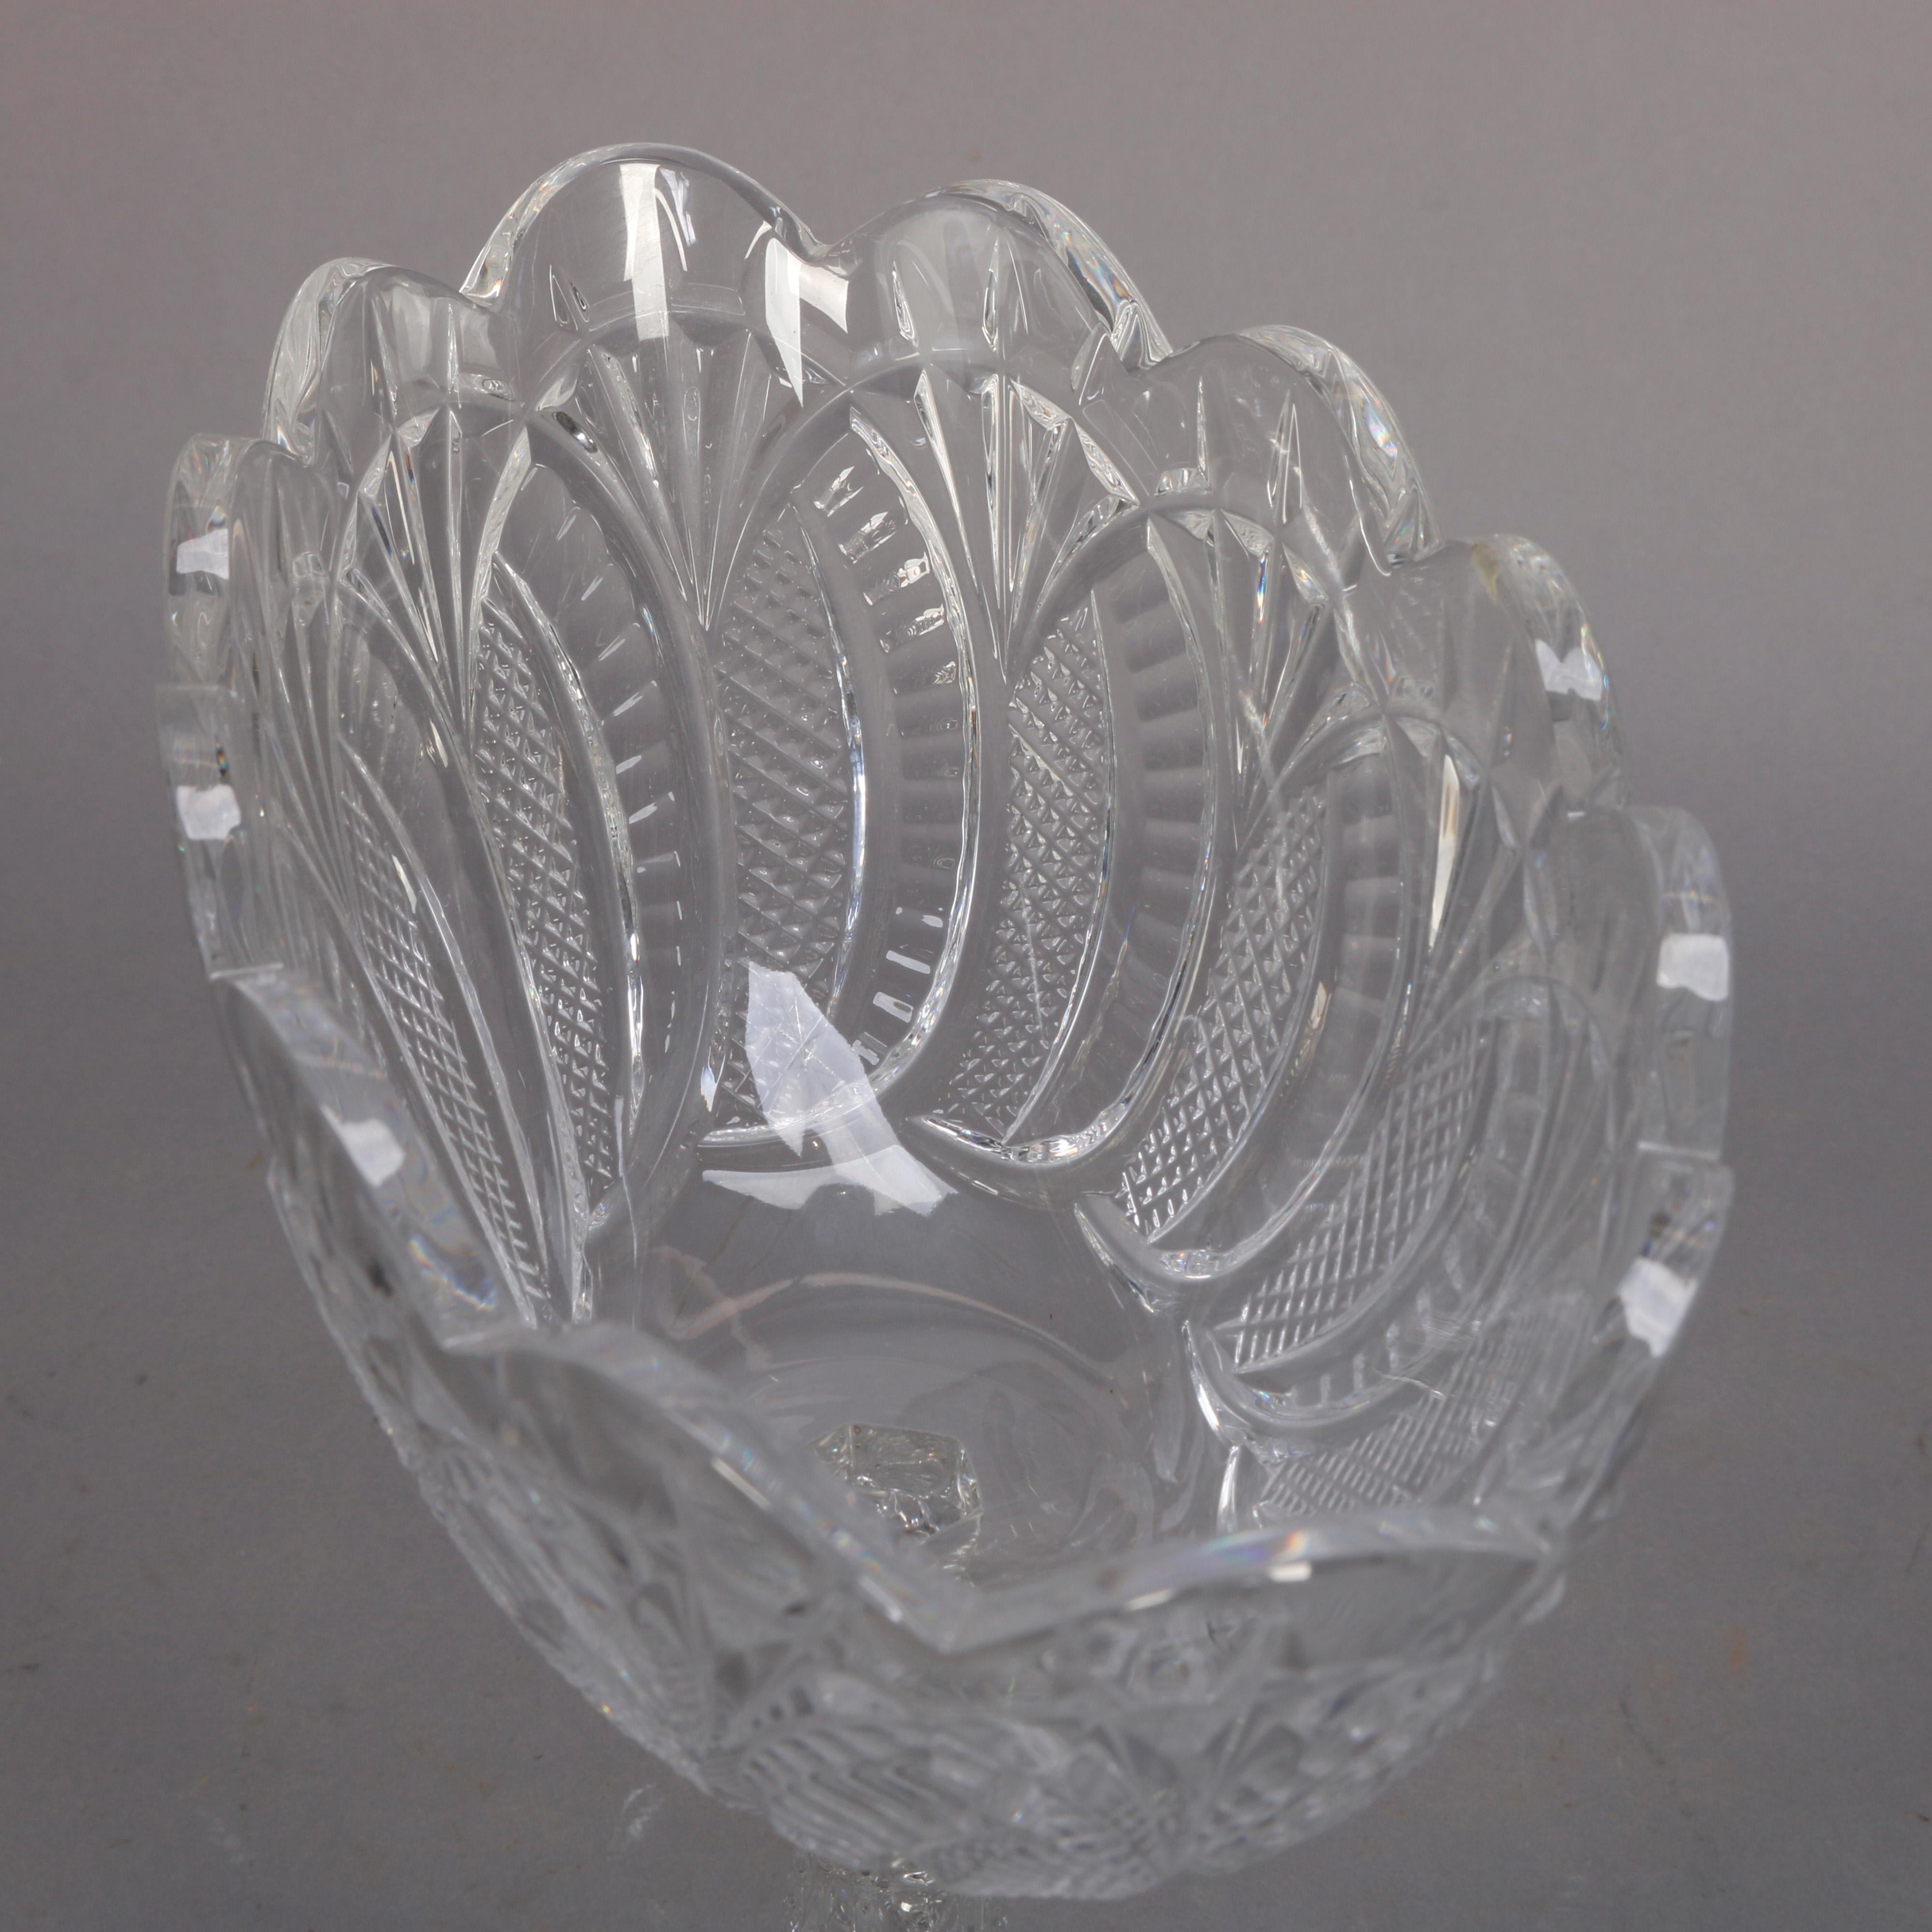 Irish Waterford Cut Crystal Figural Seahorse Compote, 20th Century at ...